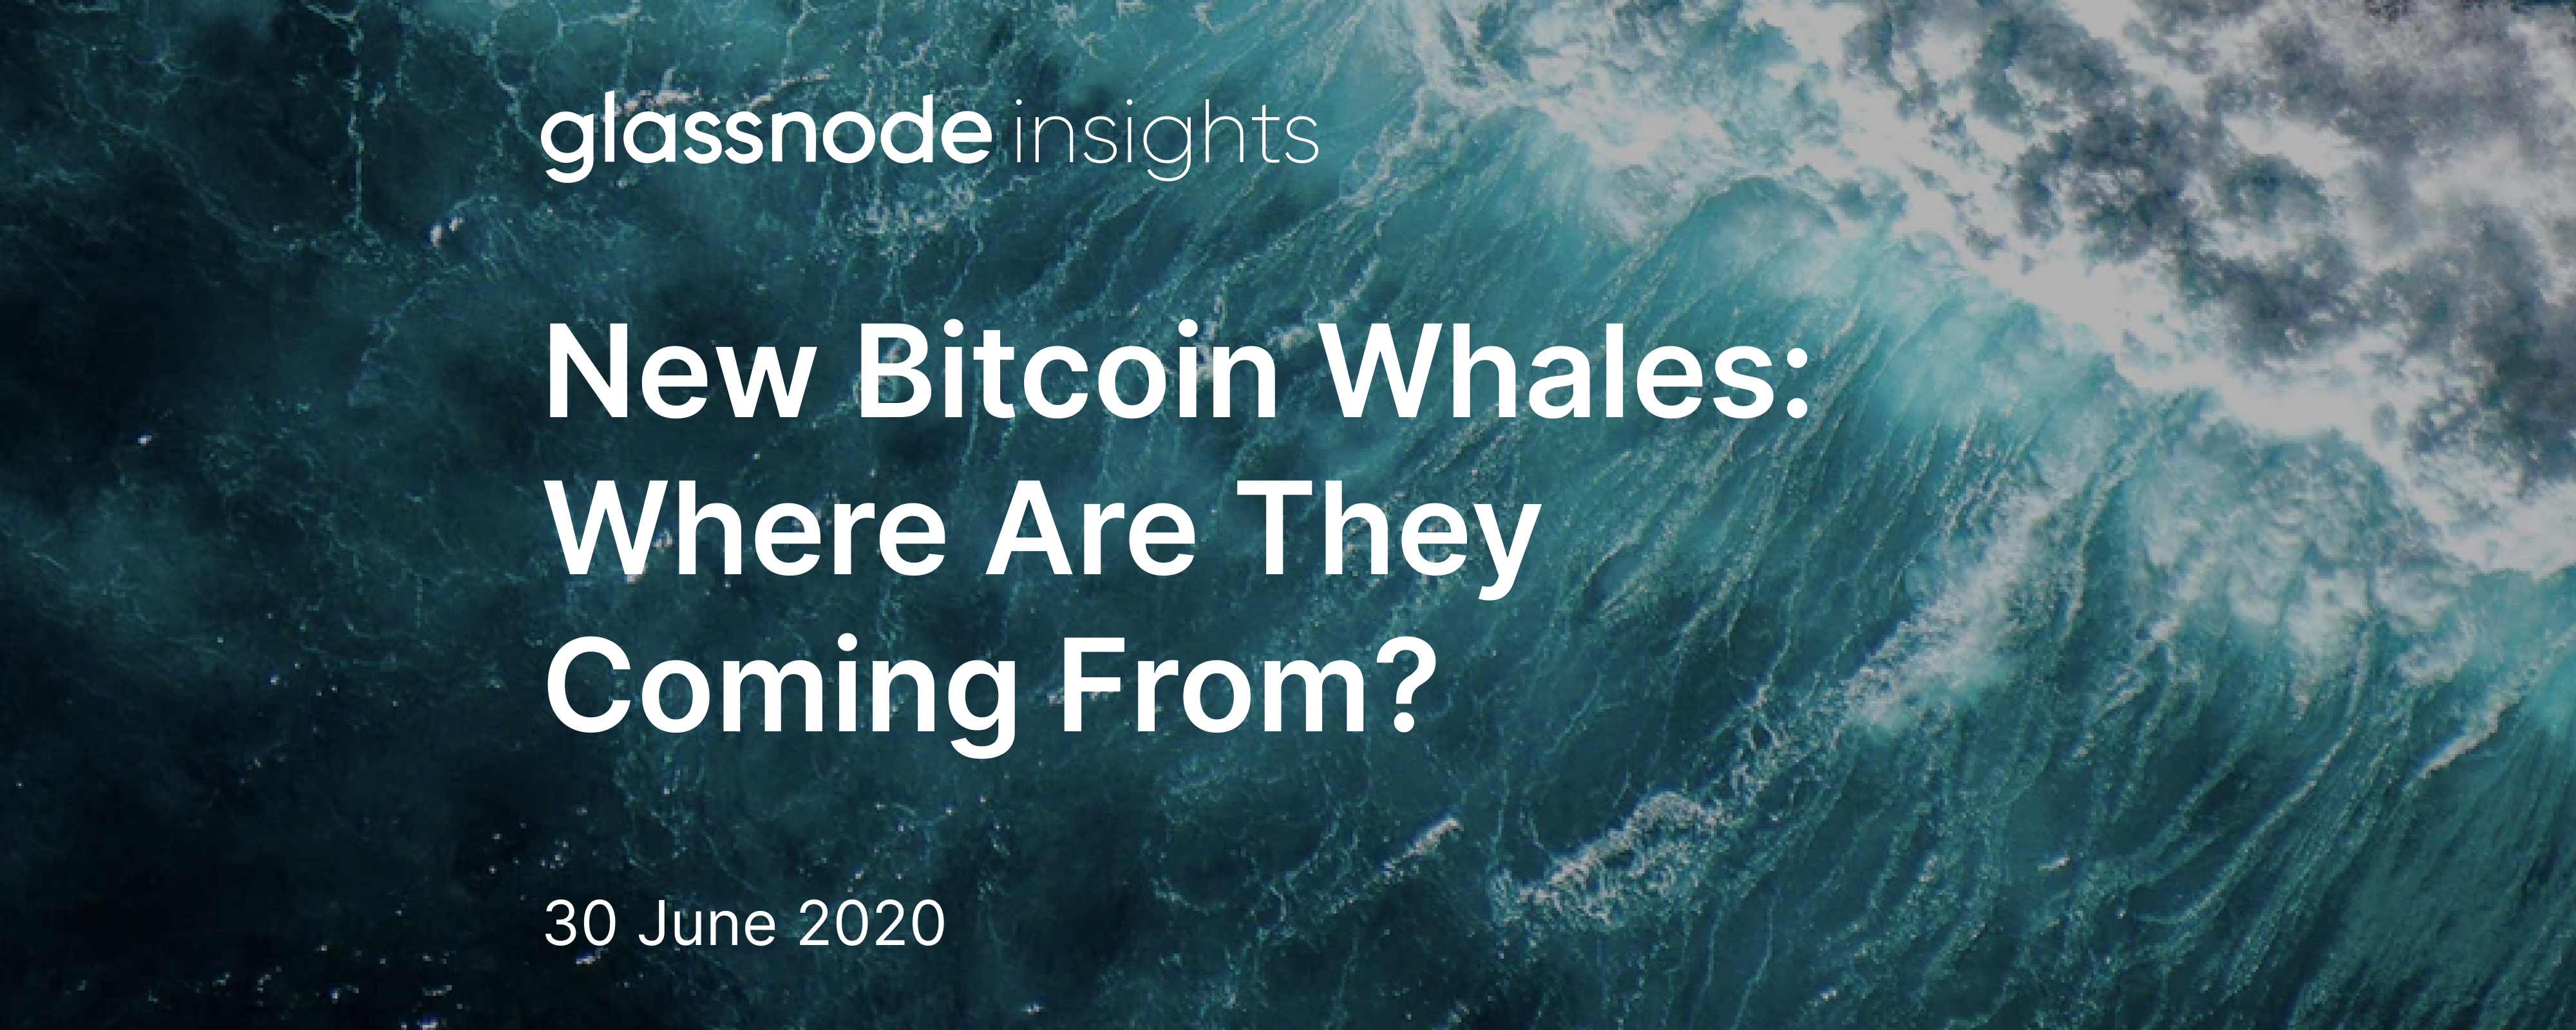 New Bitcoin Whales: Where Are They Coming From?